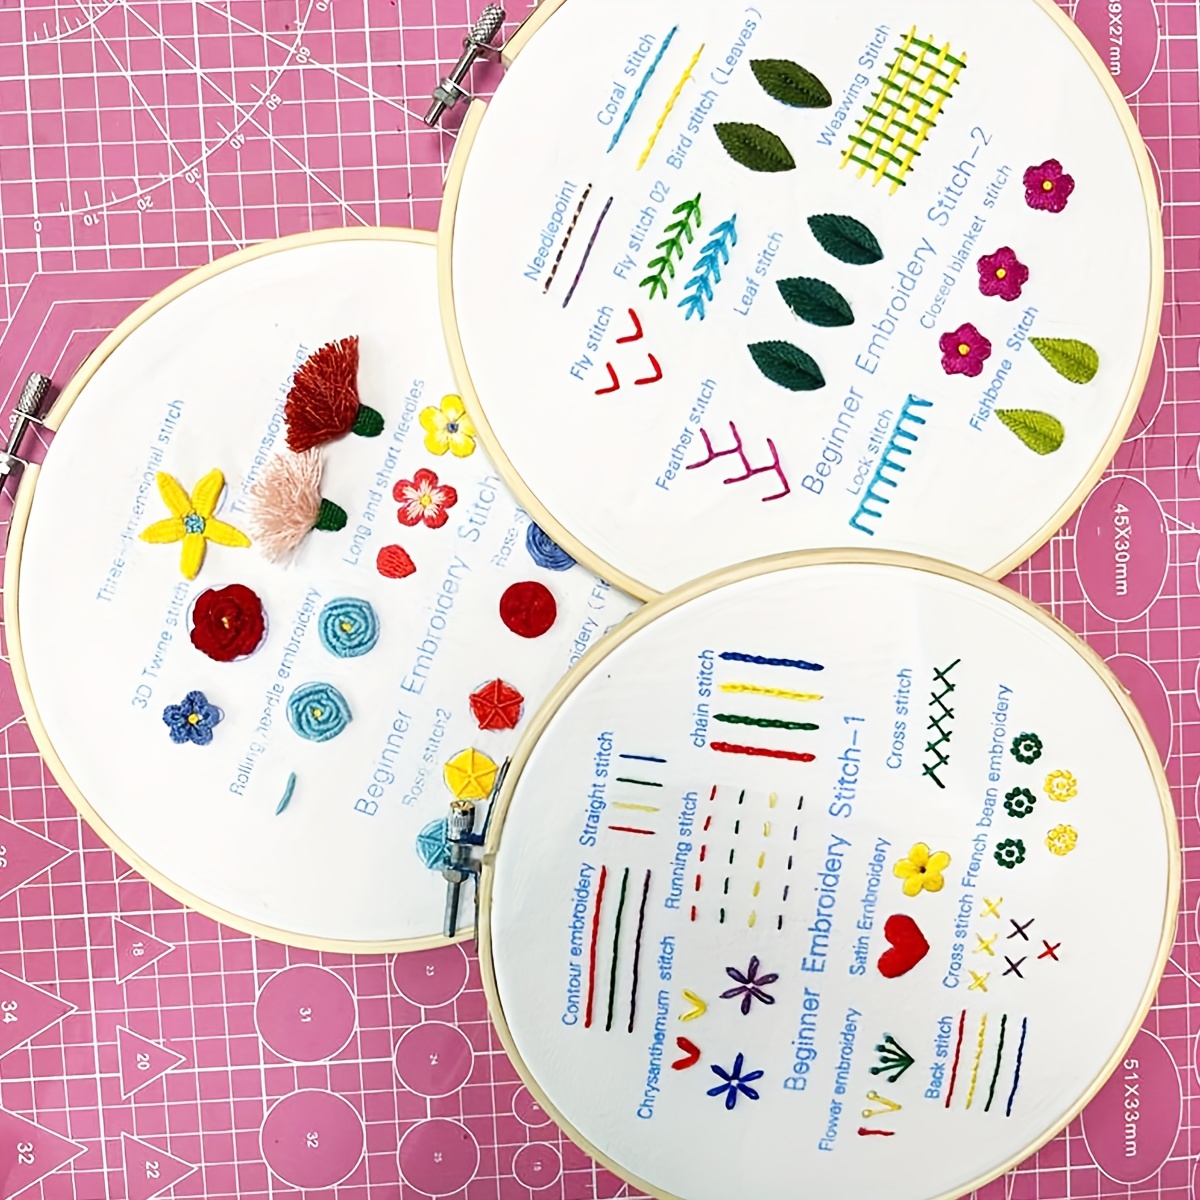 Hand Embroidery for Beginners - Part 2, 10 Basic Stitches